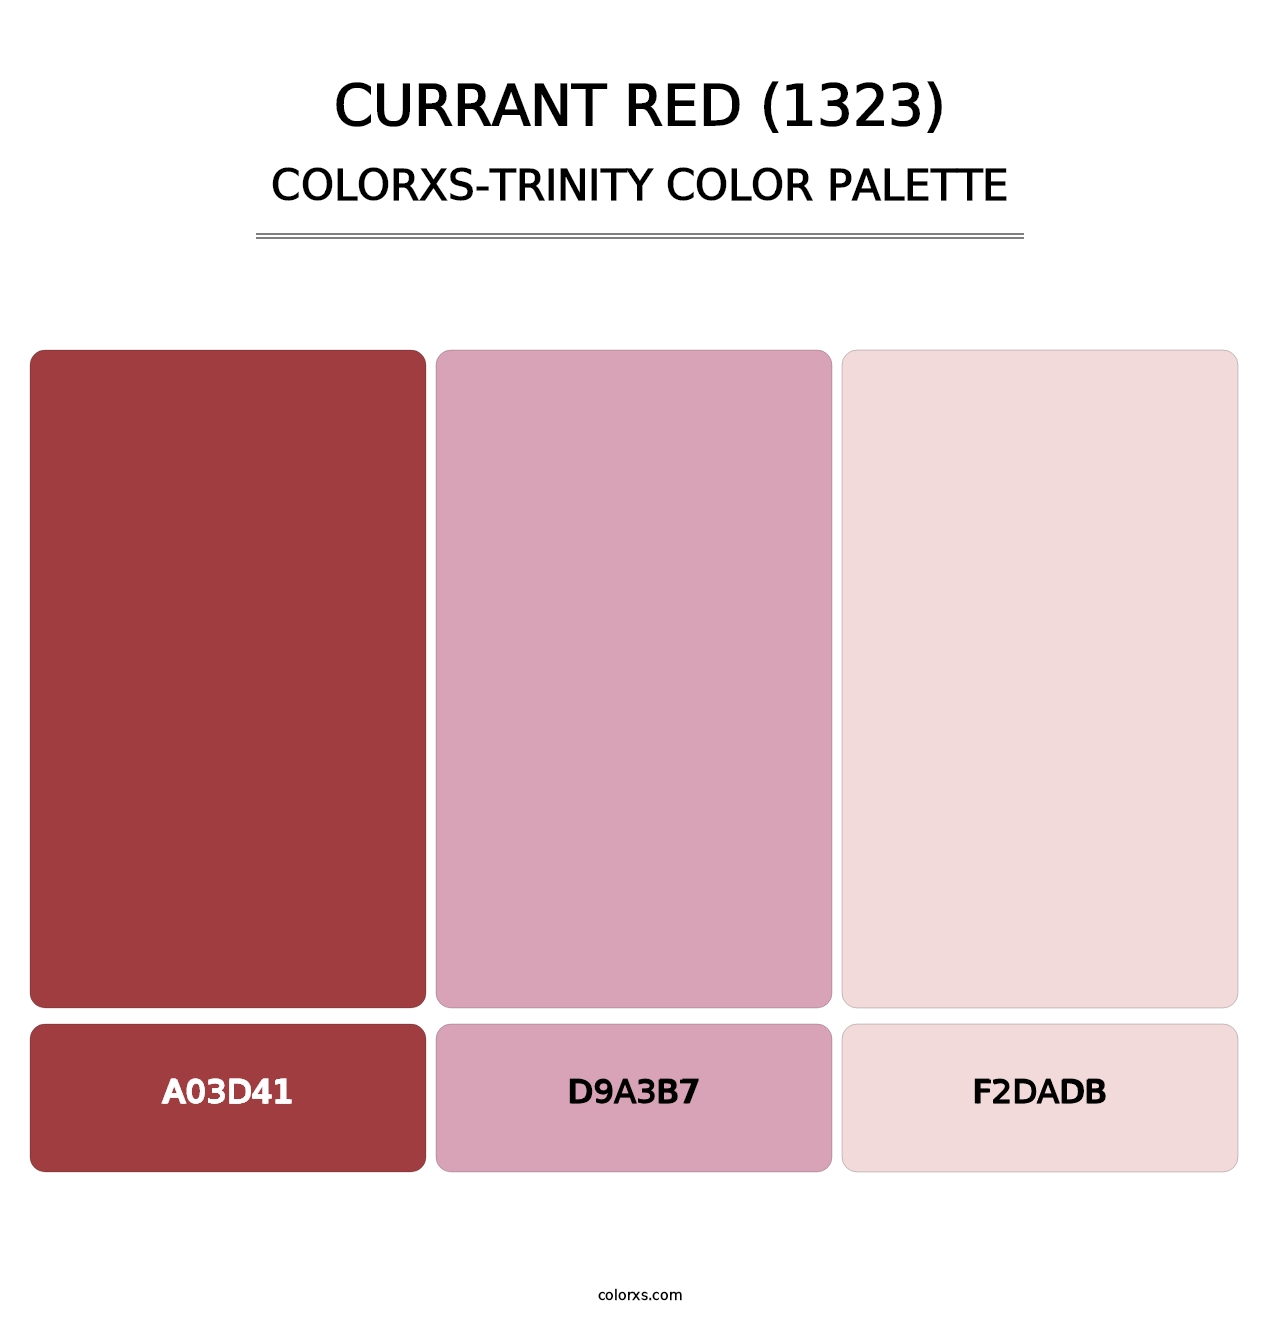 Currant Red (1323) - Colorxs Trinity Palette